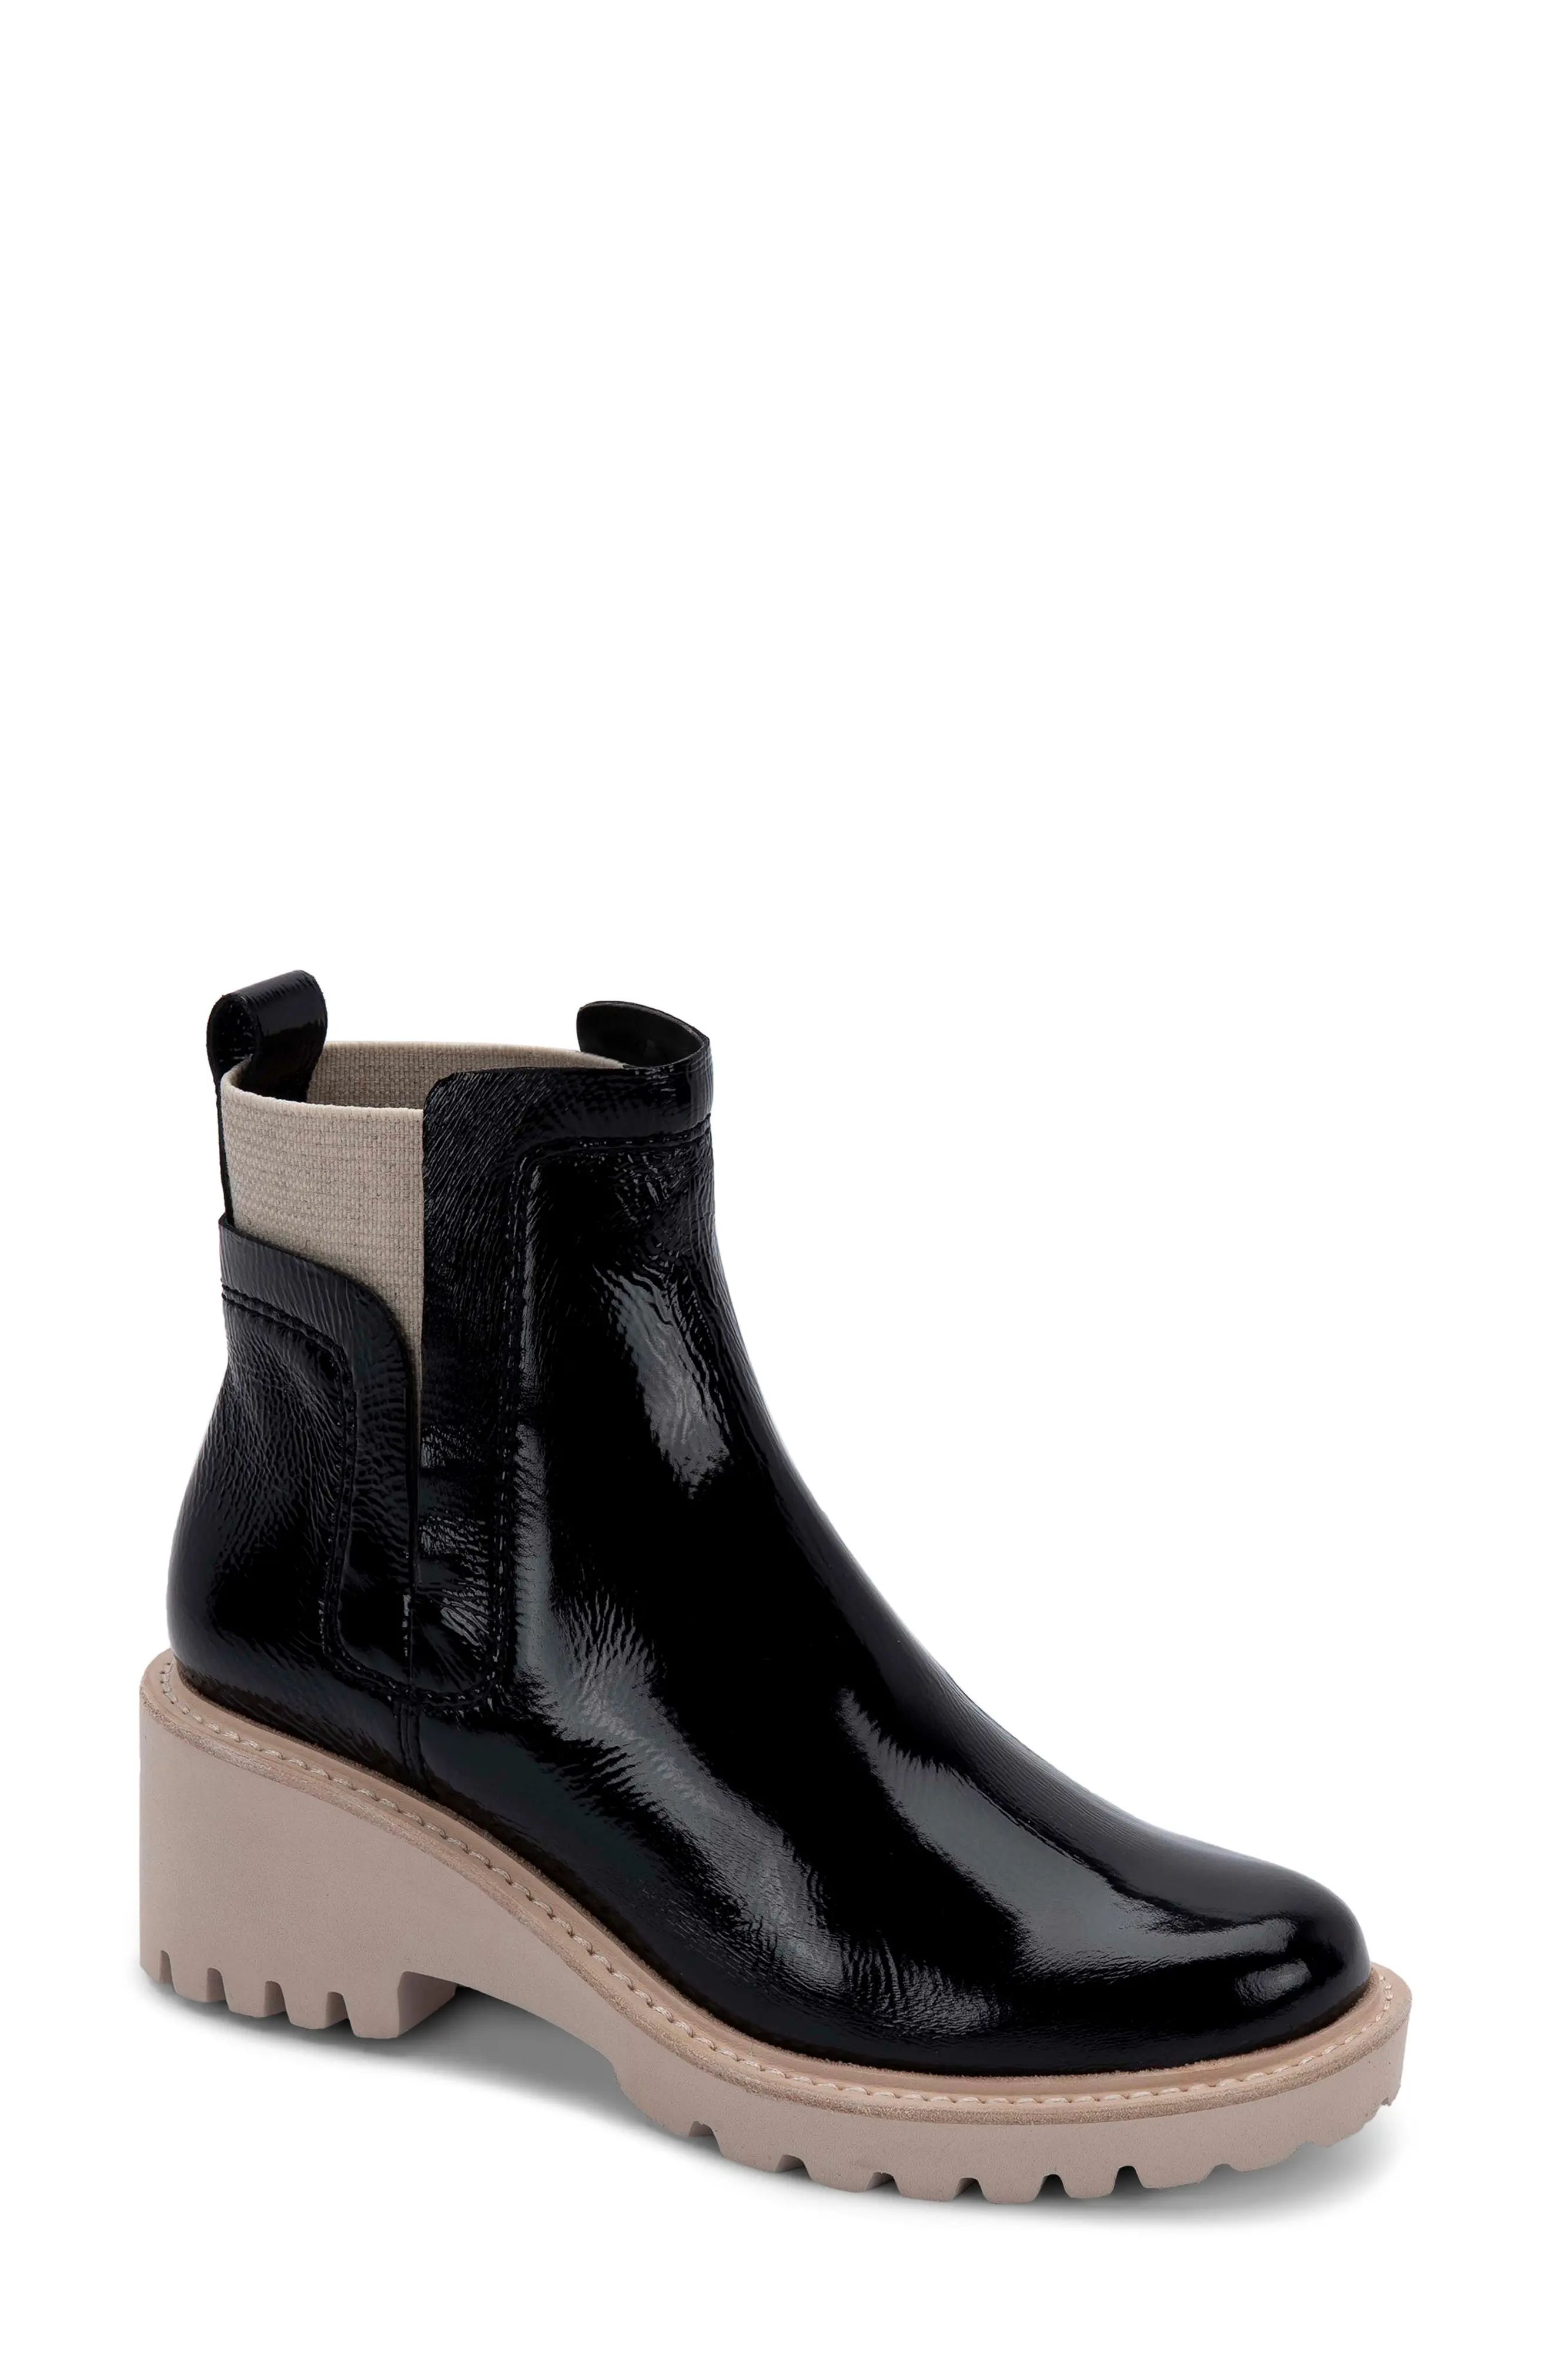 Dolce Vita Huey Bootie in Onyx Patent Leather at Nordstrom, Size 8 | Nordstrom